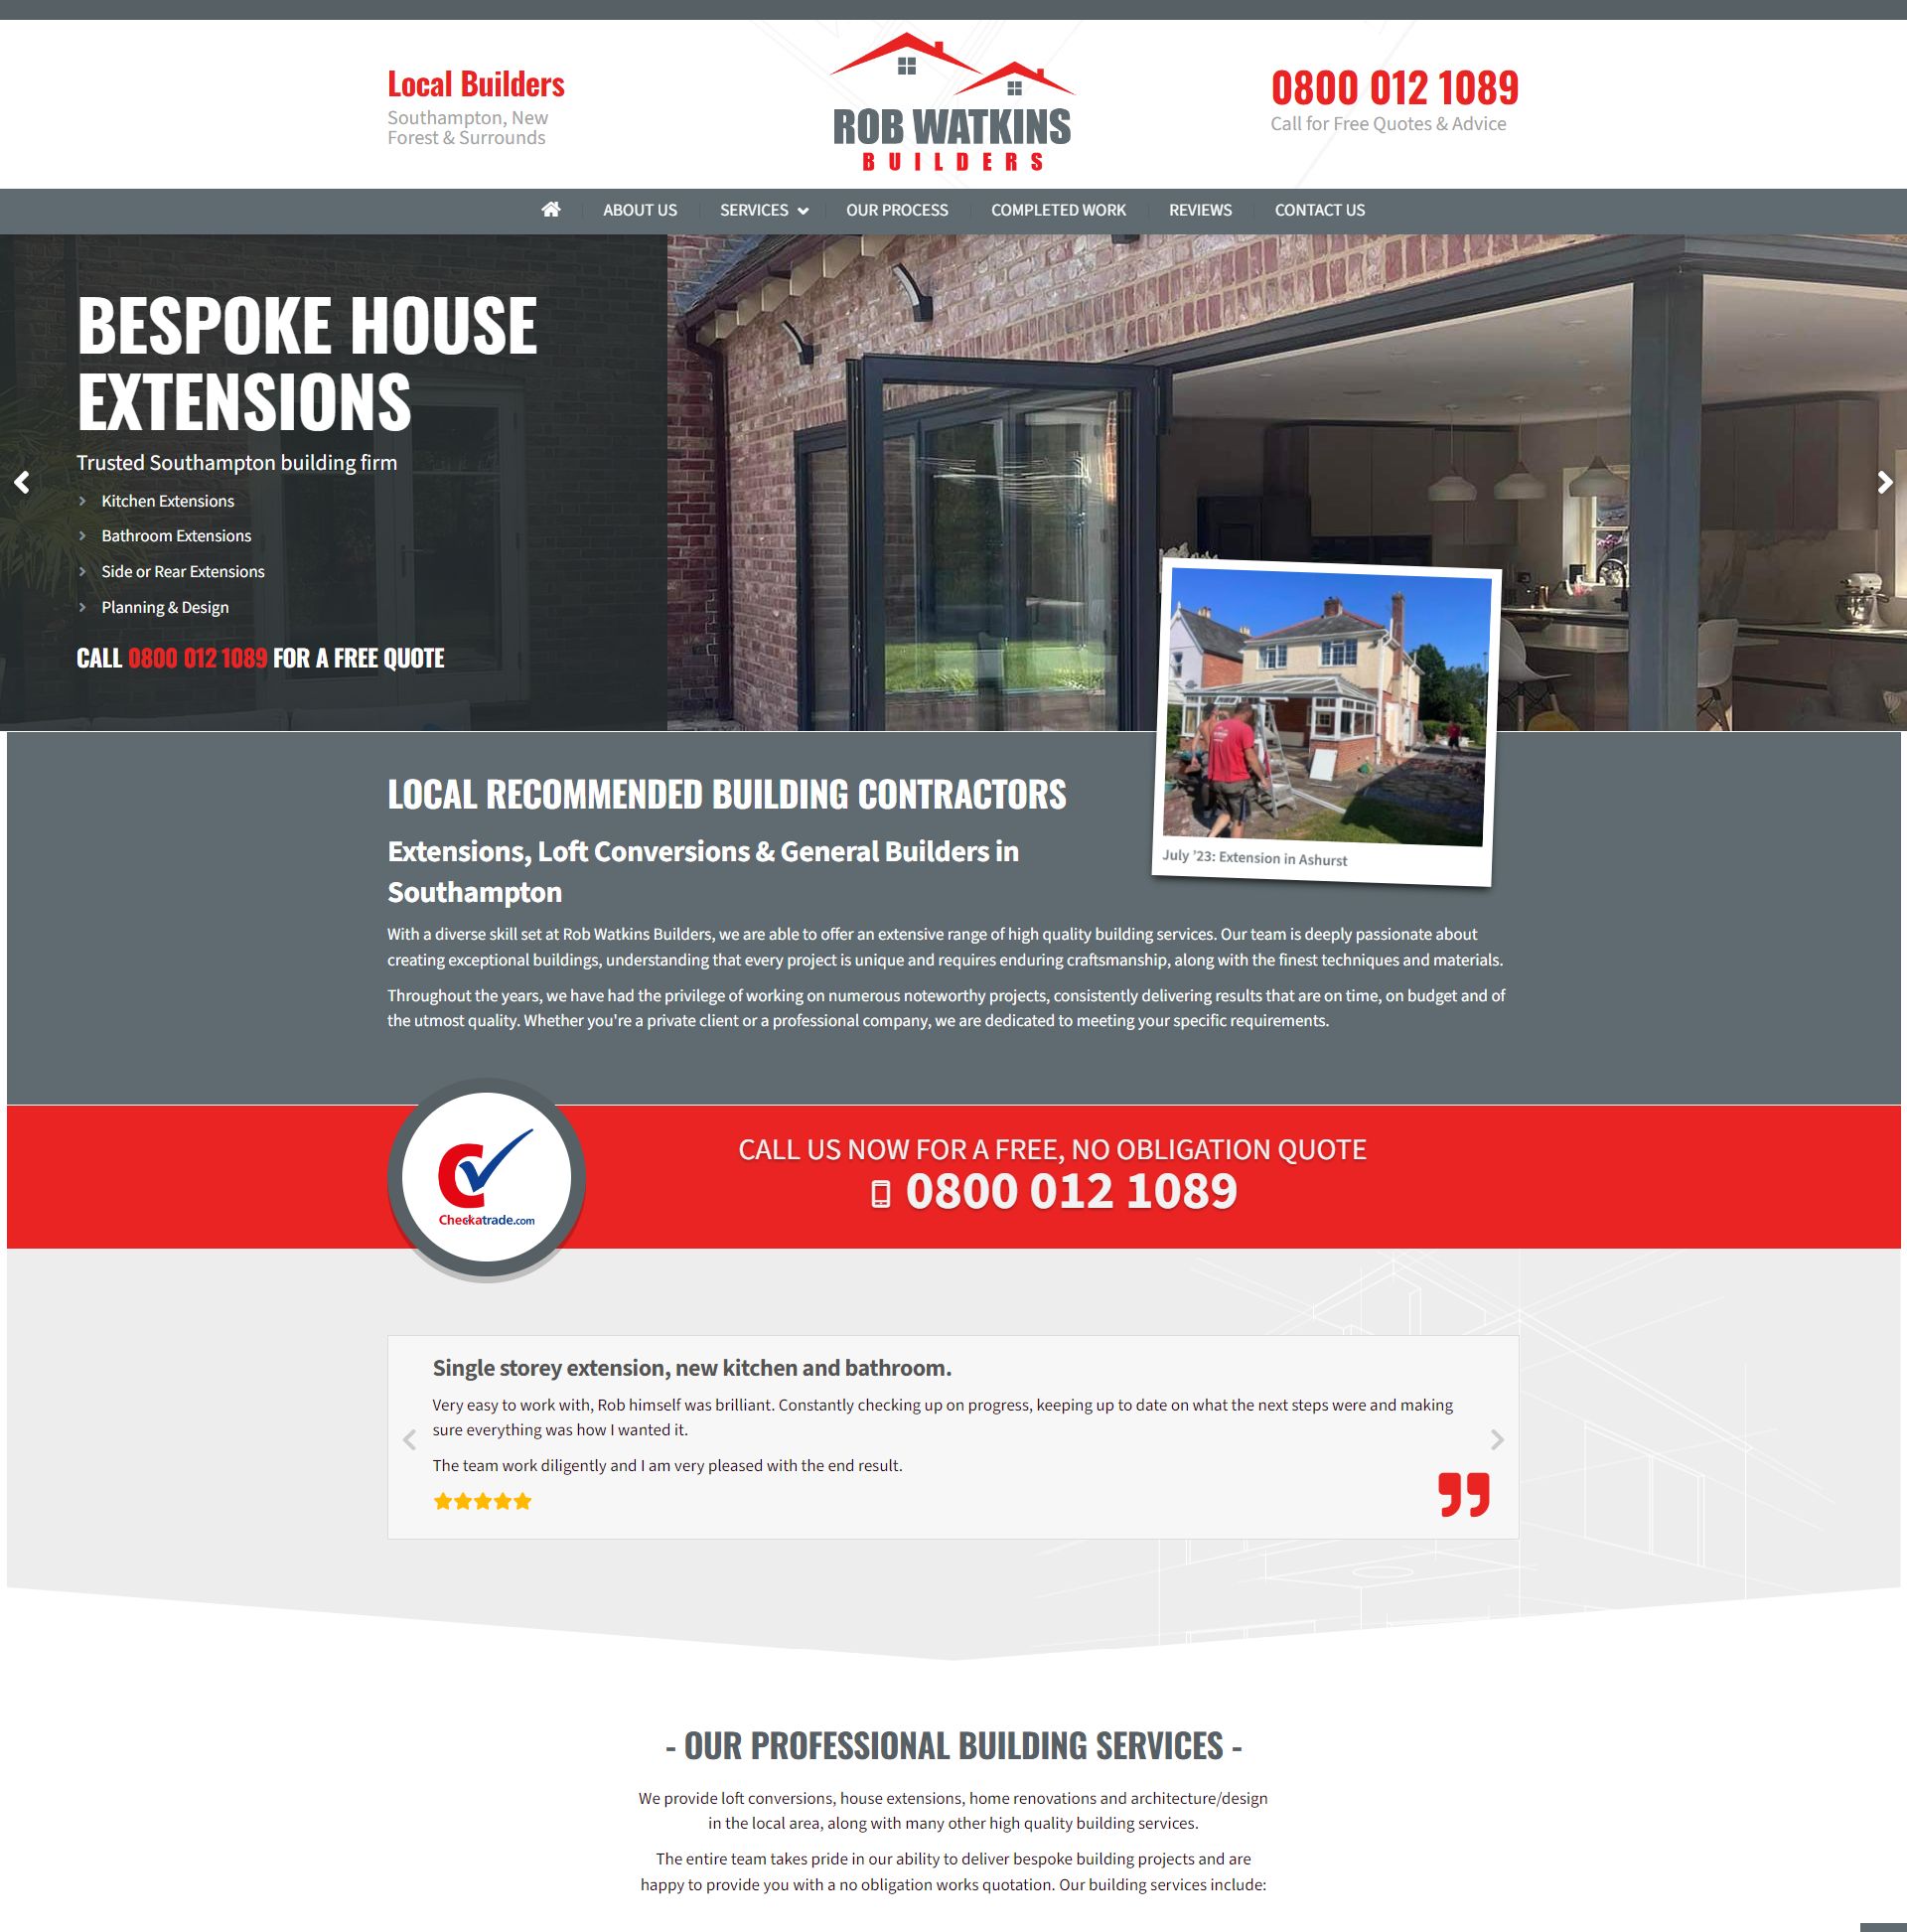 Builders in Southampton, New Forest & Surrounds